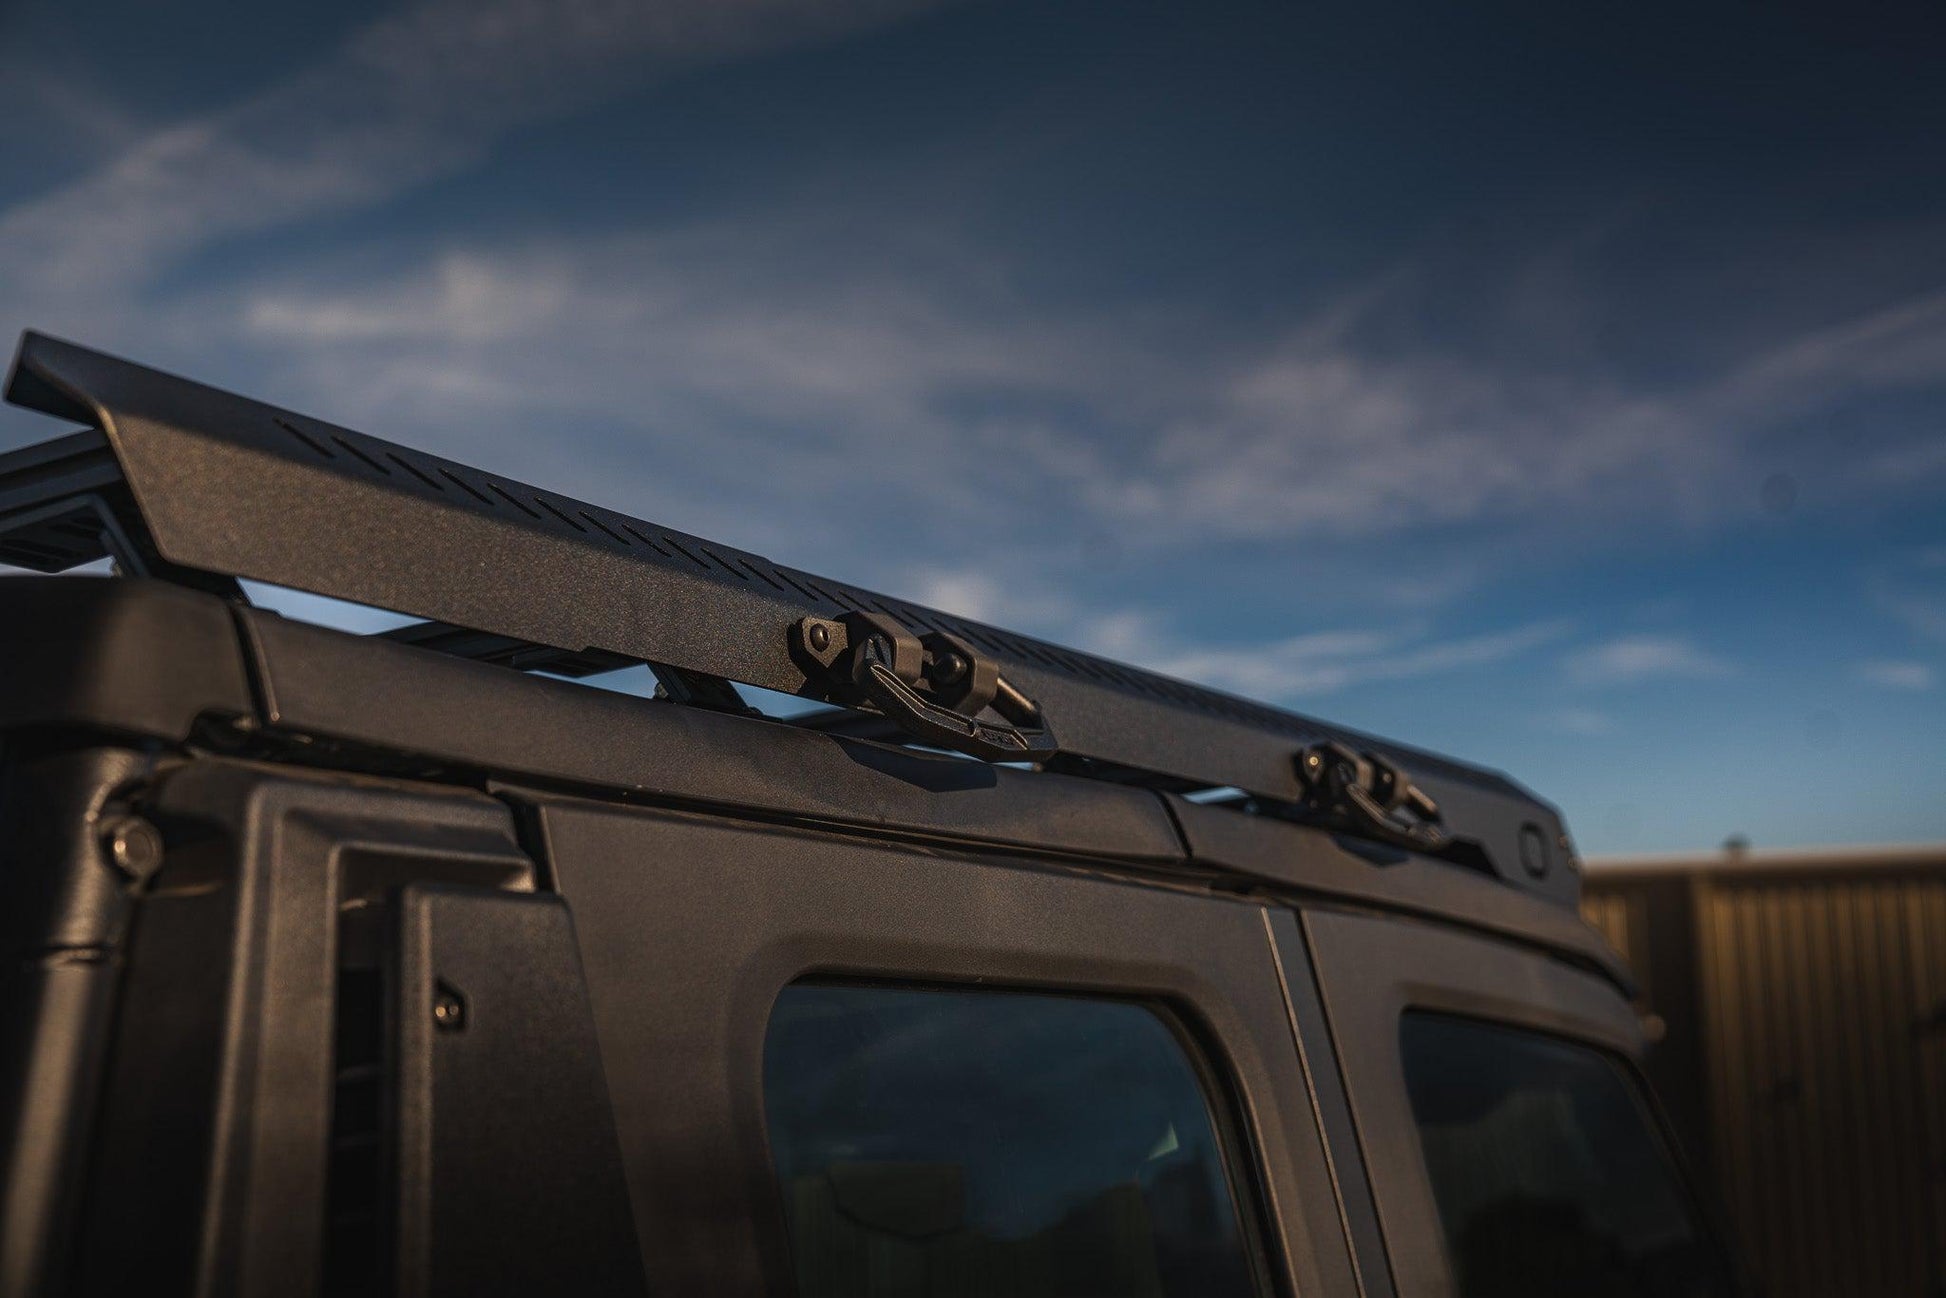 upTOP Overland SxS Roof Rack upTOP Overland | Polaris XPEDITION XP 5 Full Roof Rack